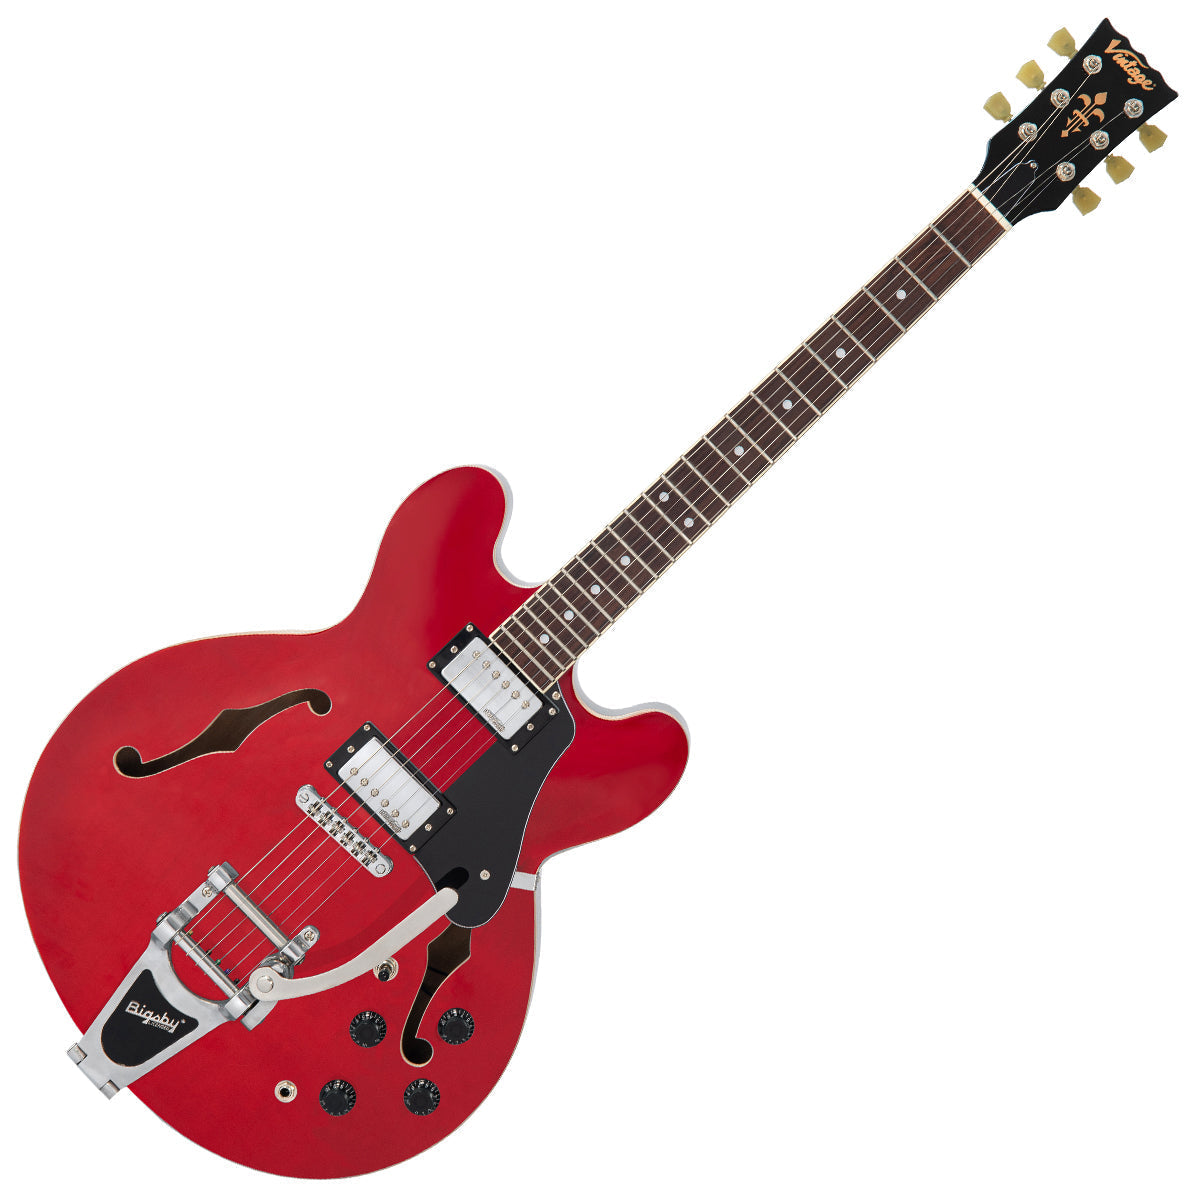 Vintage VSA500B ReIssued Semi Acoustic Guitar w/Bigsby ~ Cherry Red, Electric Guitar for sale at Richards Guitars.